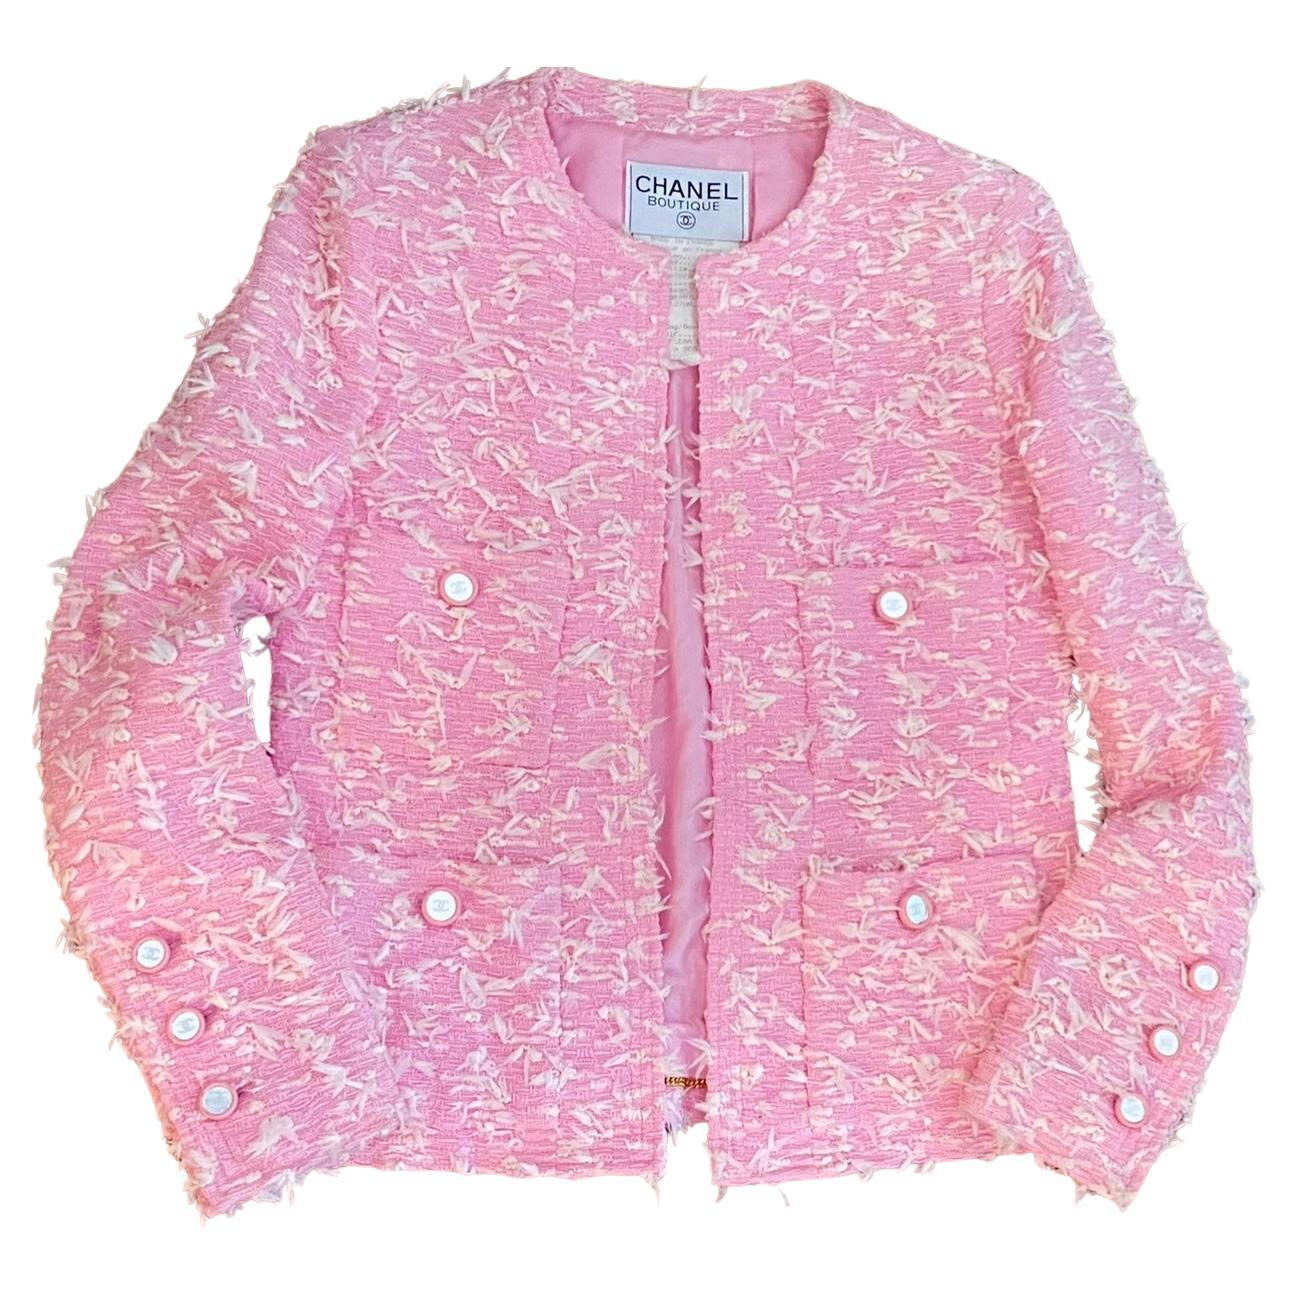 Rare Chanel Cruise 1995 pink boucle jacket  For Sale